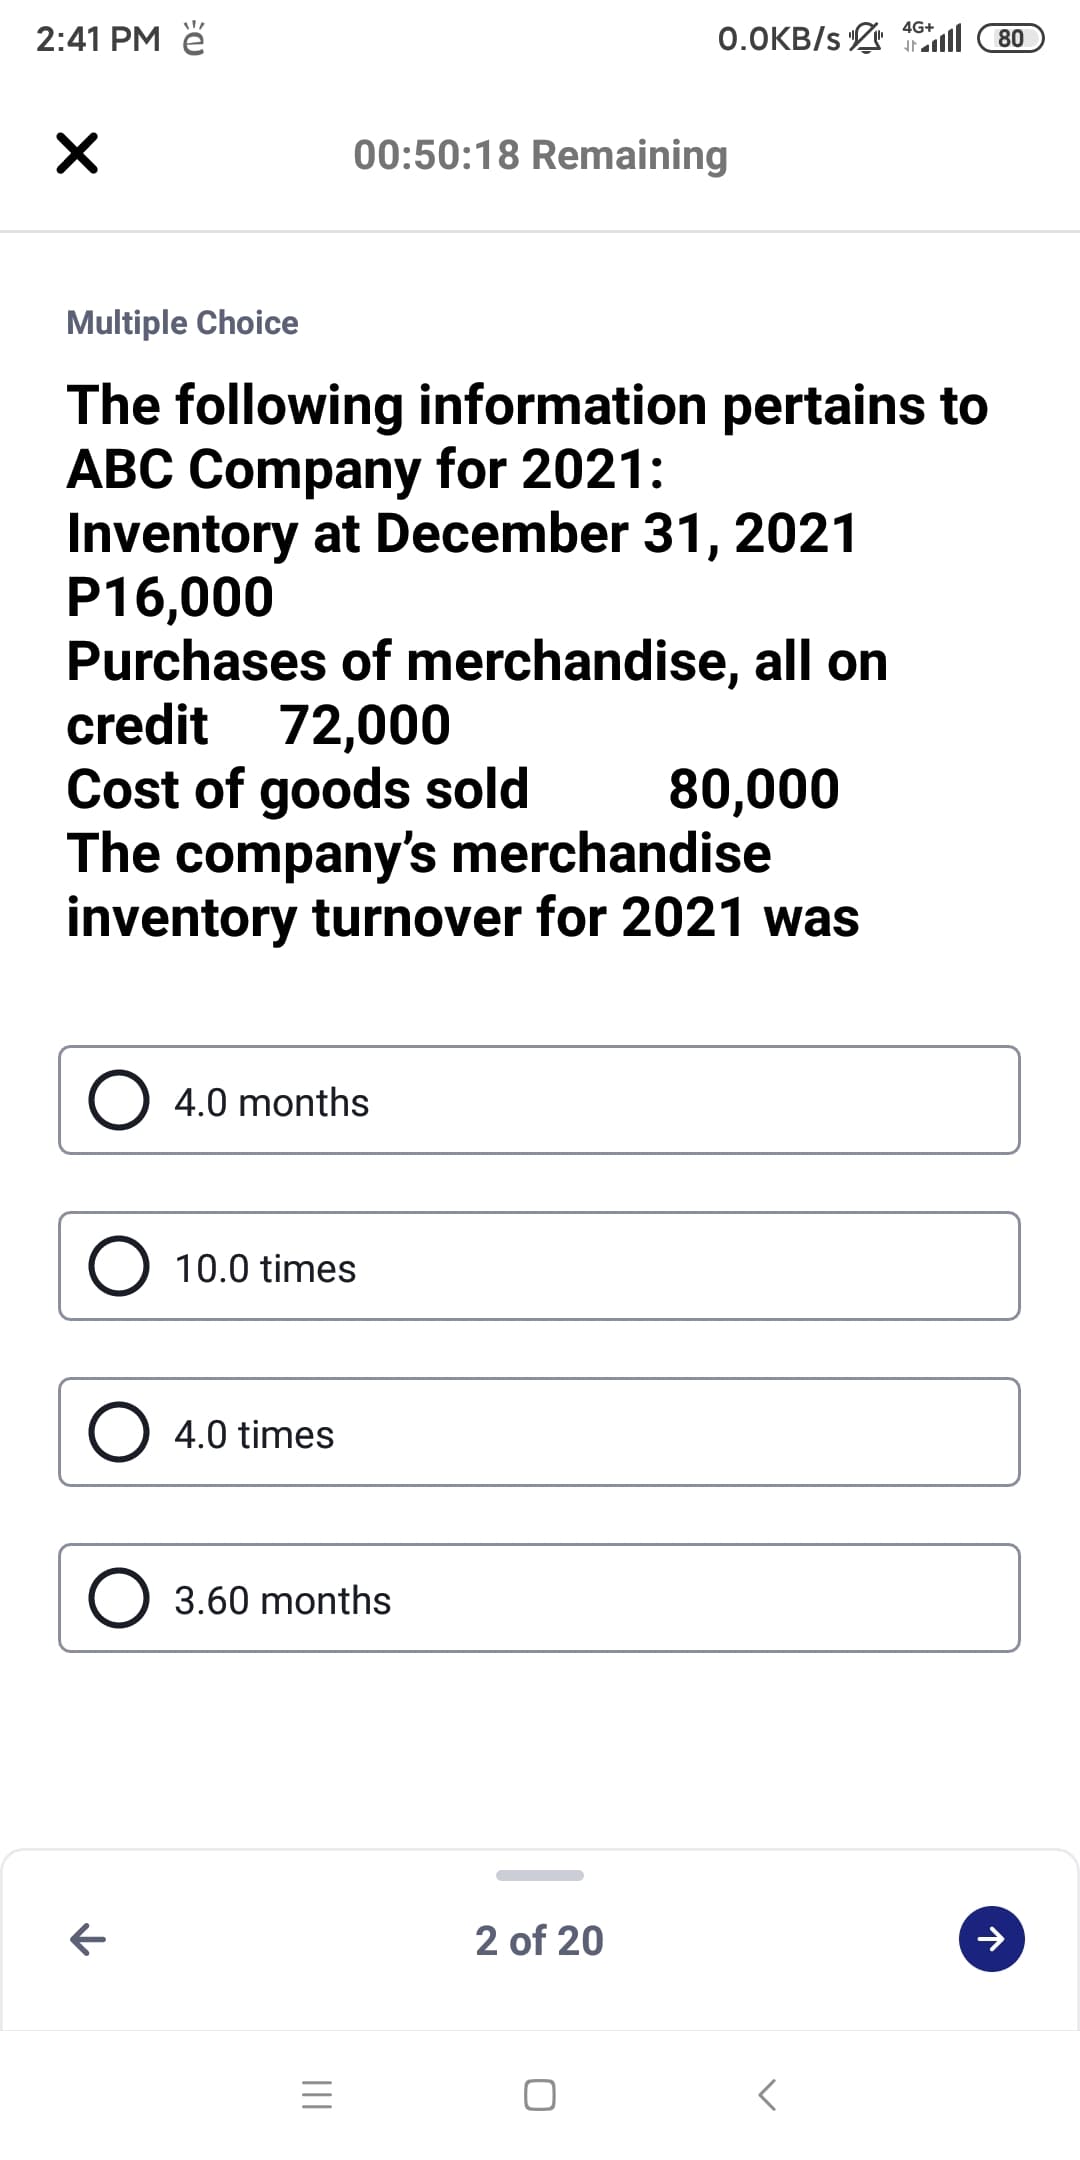 4G+
2:41 PM ě
0.OKB/s l
80
00:50:18 Remaining
Multiple Choice
The following information pertains to
ABC Company for 2021:
Inventory at December 31, 2021
P16,000
Purchases of merchandise, all on
credit 72,000
Cost of goods sold
The company's merchandise
inventory turnover for 2021 was
80,000
O 4.0 months
10.0 times
O 4.0 times
3.60 months
2 of 20
